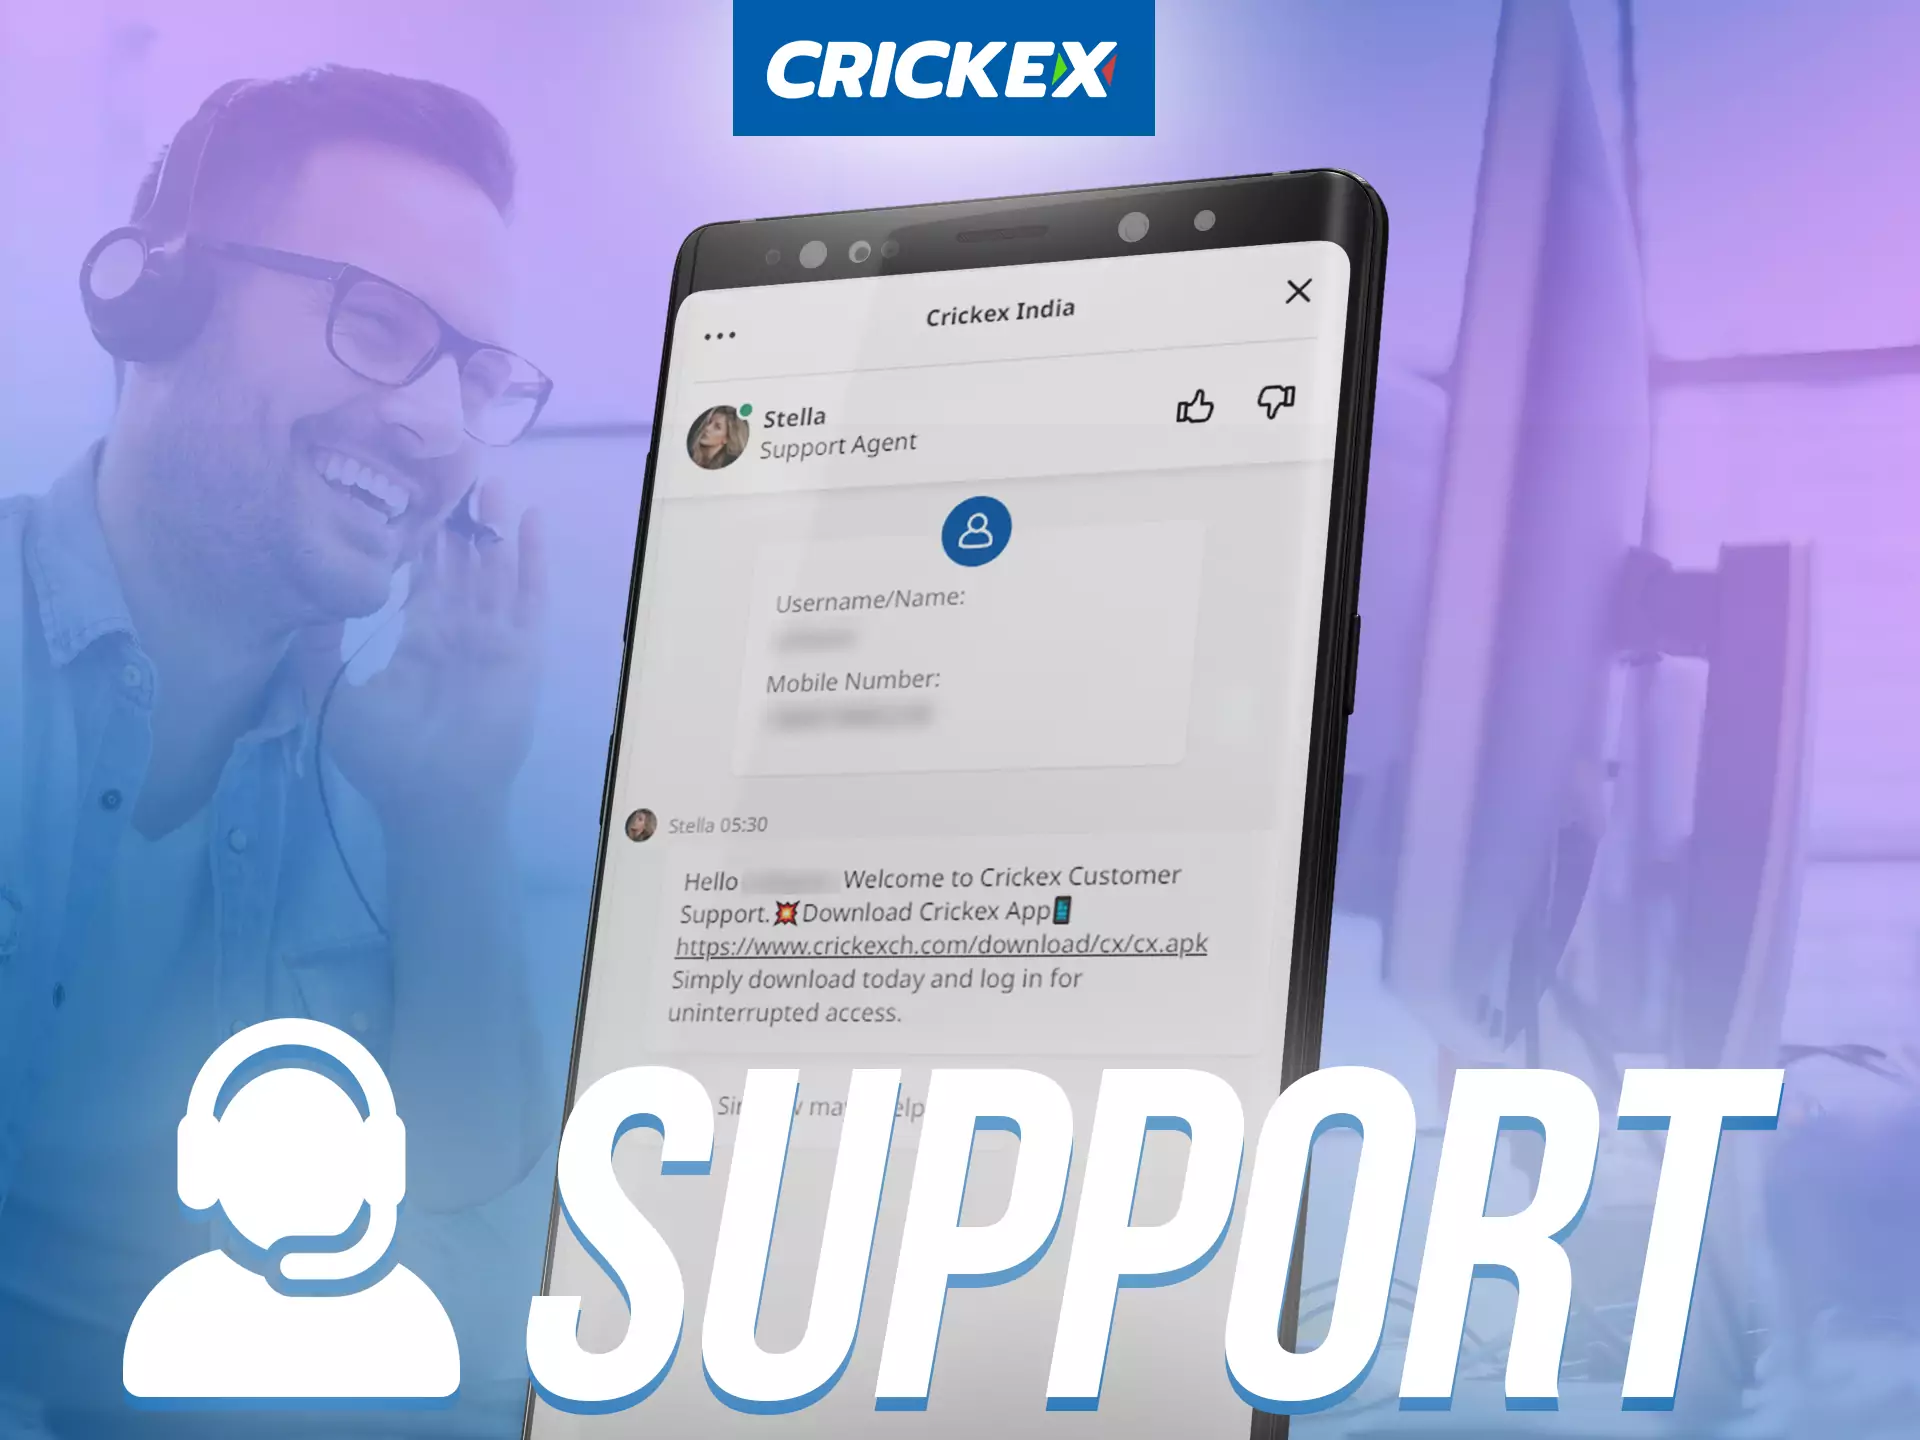 In the Crickex app, users can count on the support around the clock.